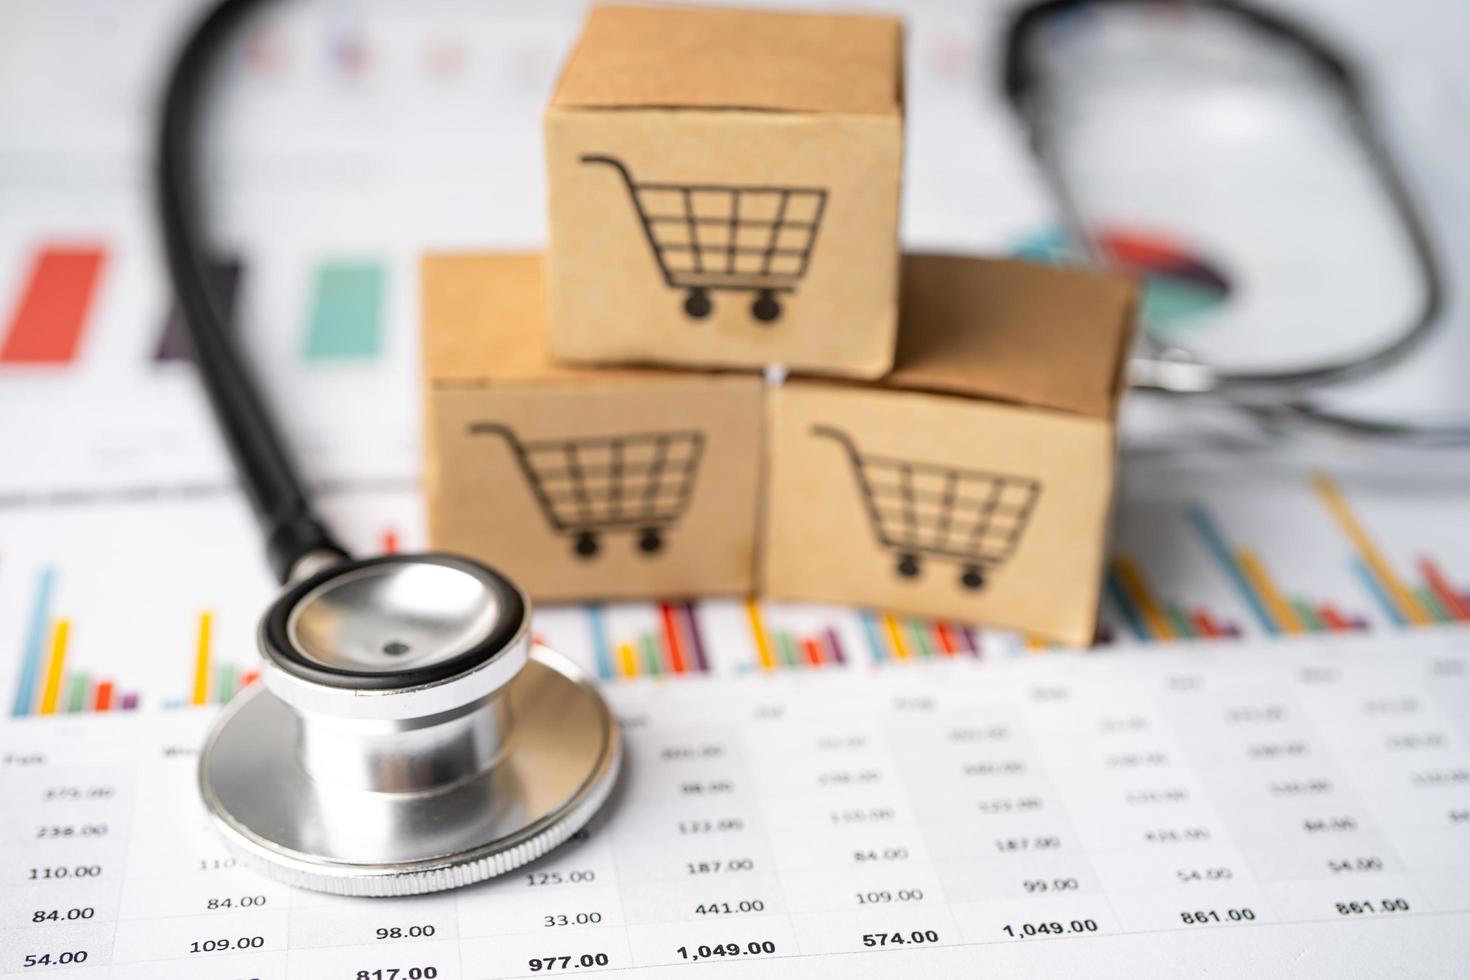 Stethoscope and shopping cart logo on box with calculator on graph background. Banking Account, Investment Analytic research data economy, trading, Business import export transportation online company concept. photo